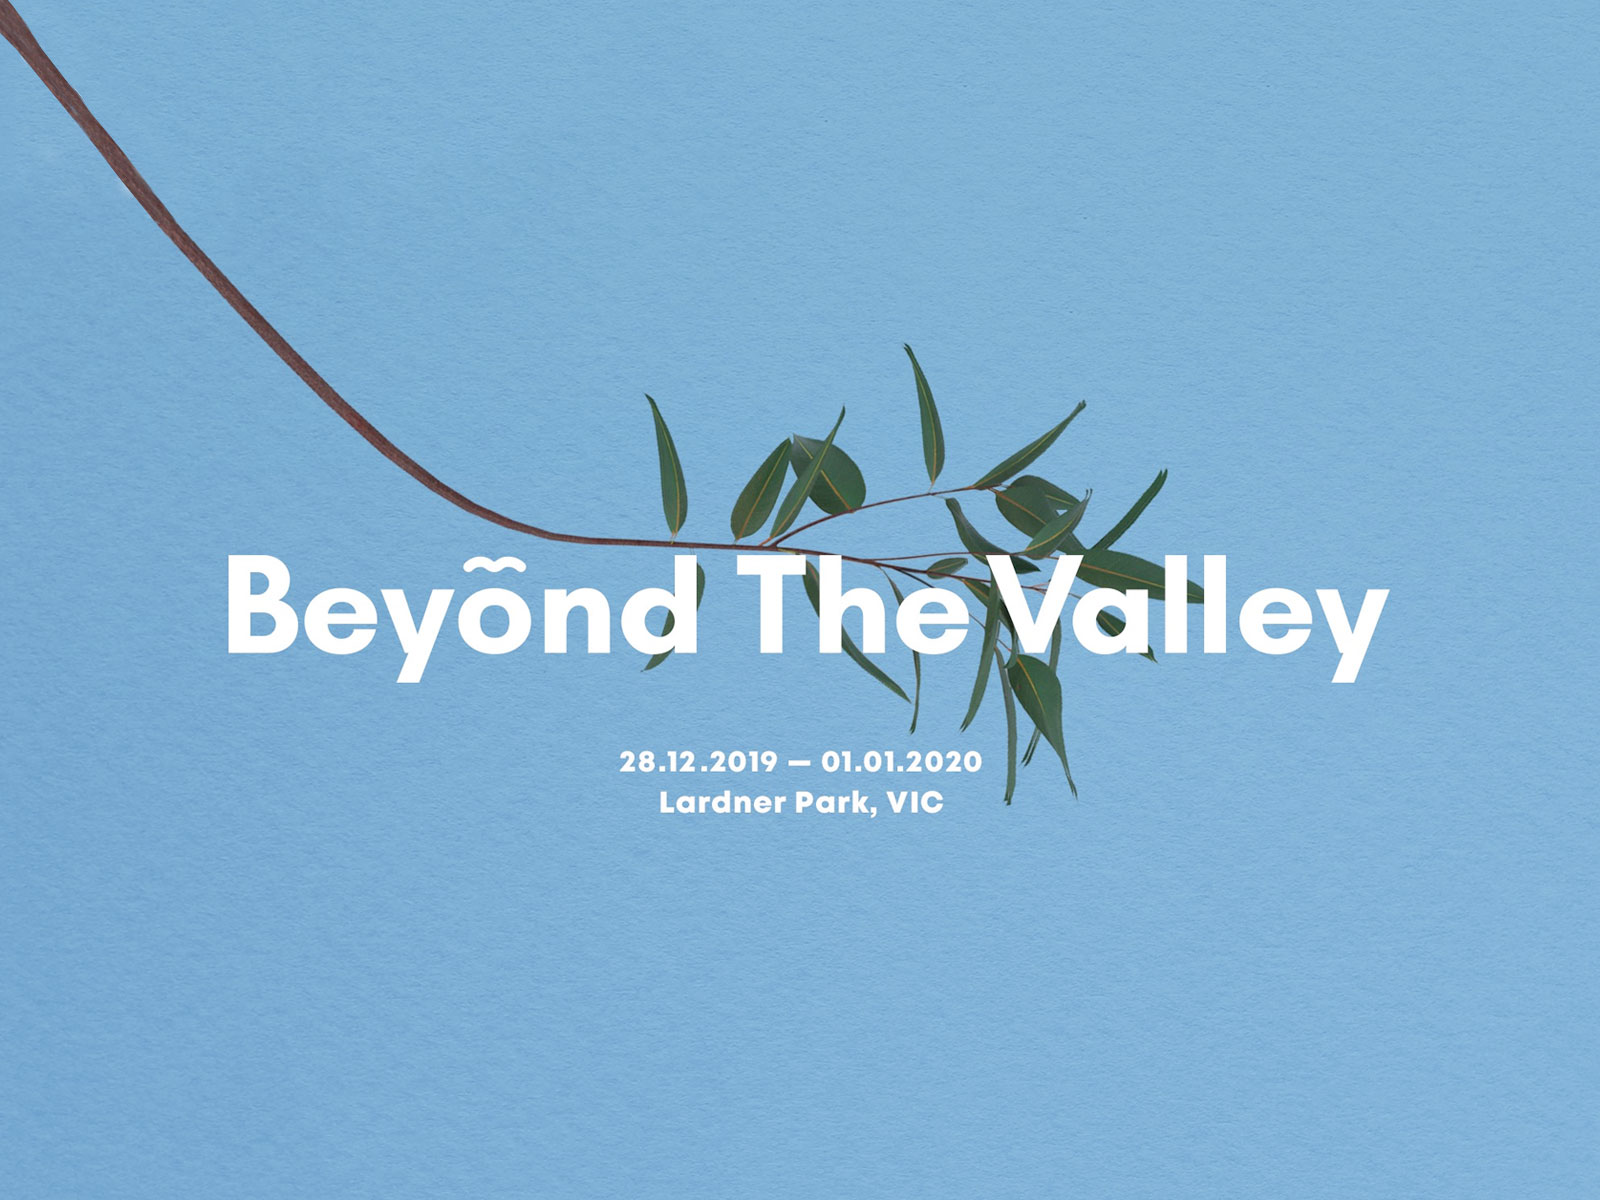 beyond-the-valley-2019-feature-oz-edm